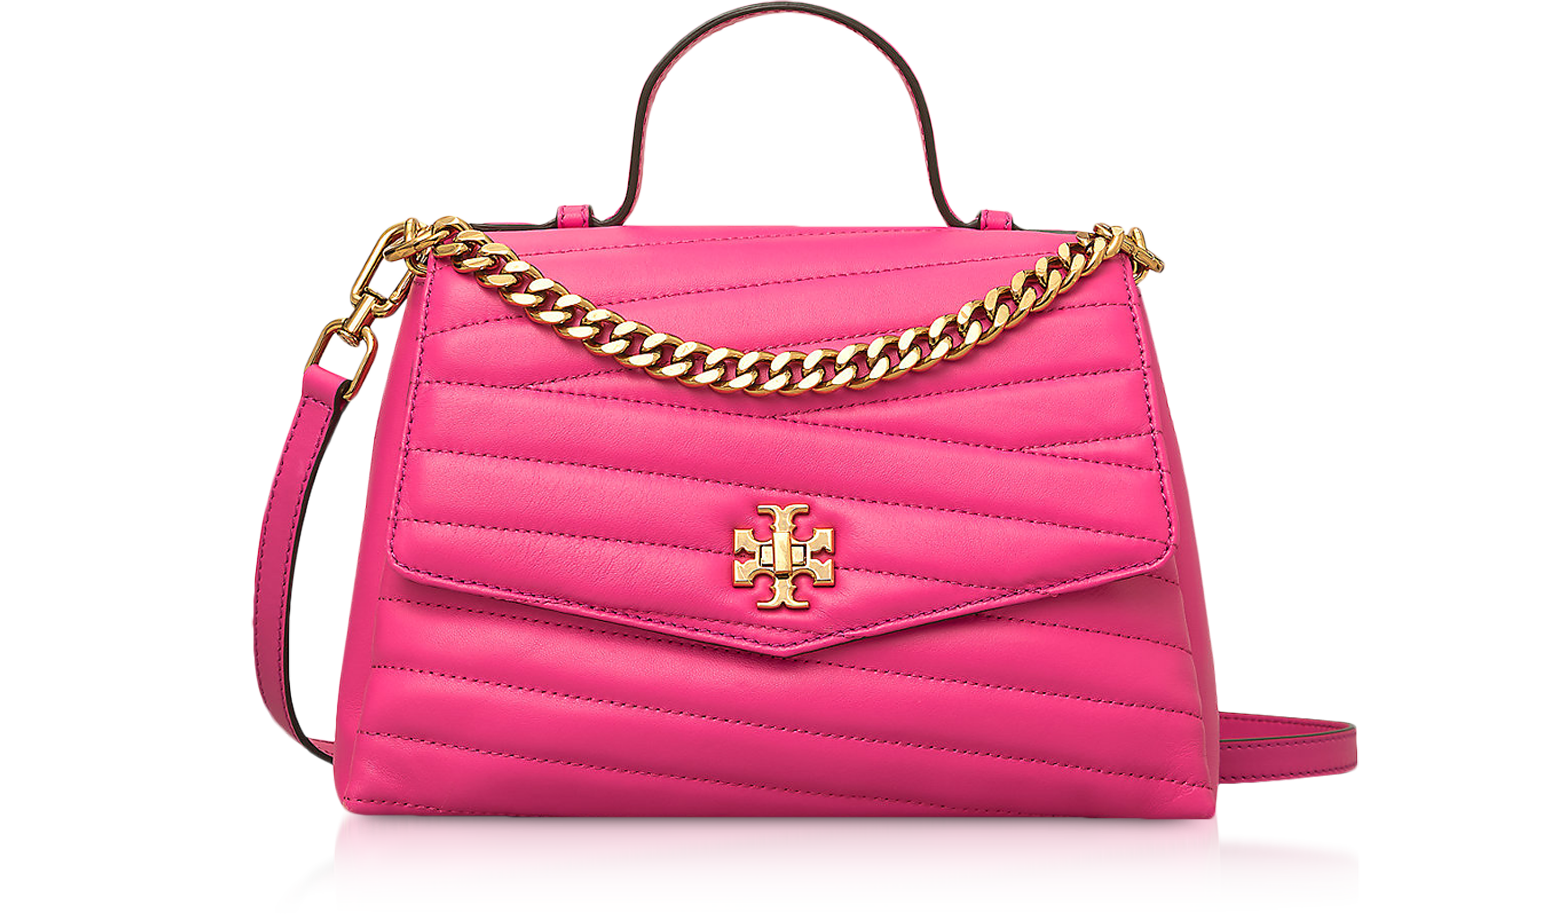 Tory Burch pink tote 